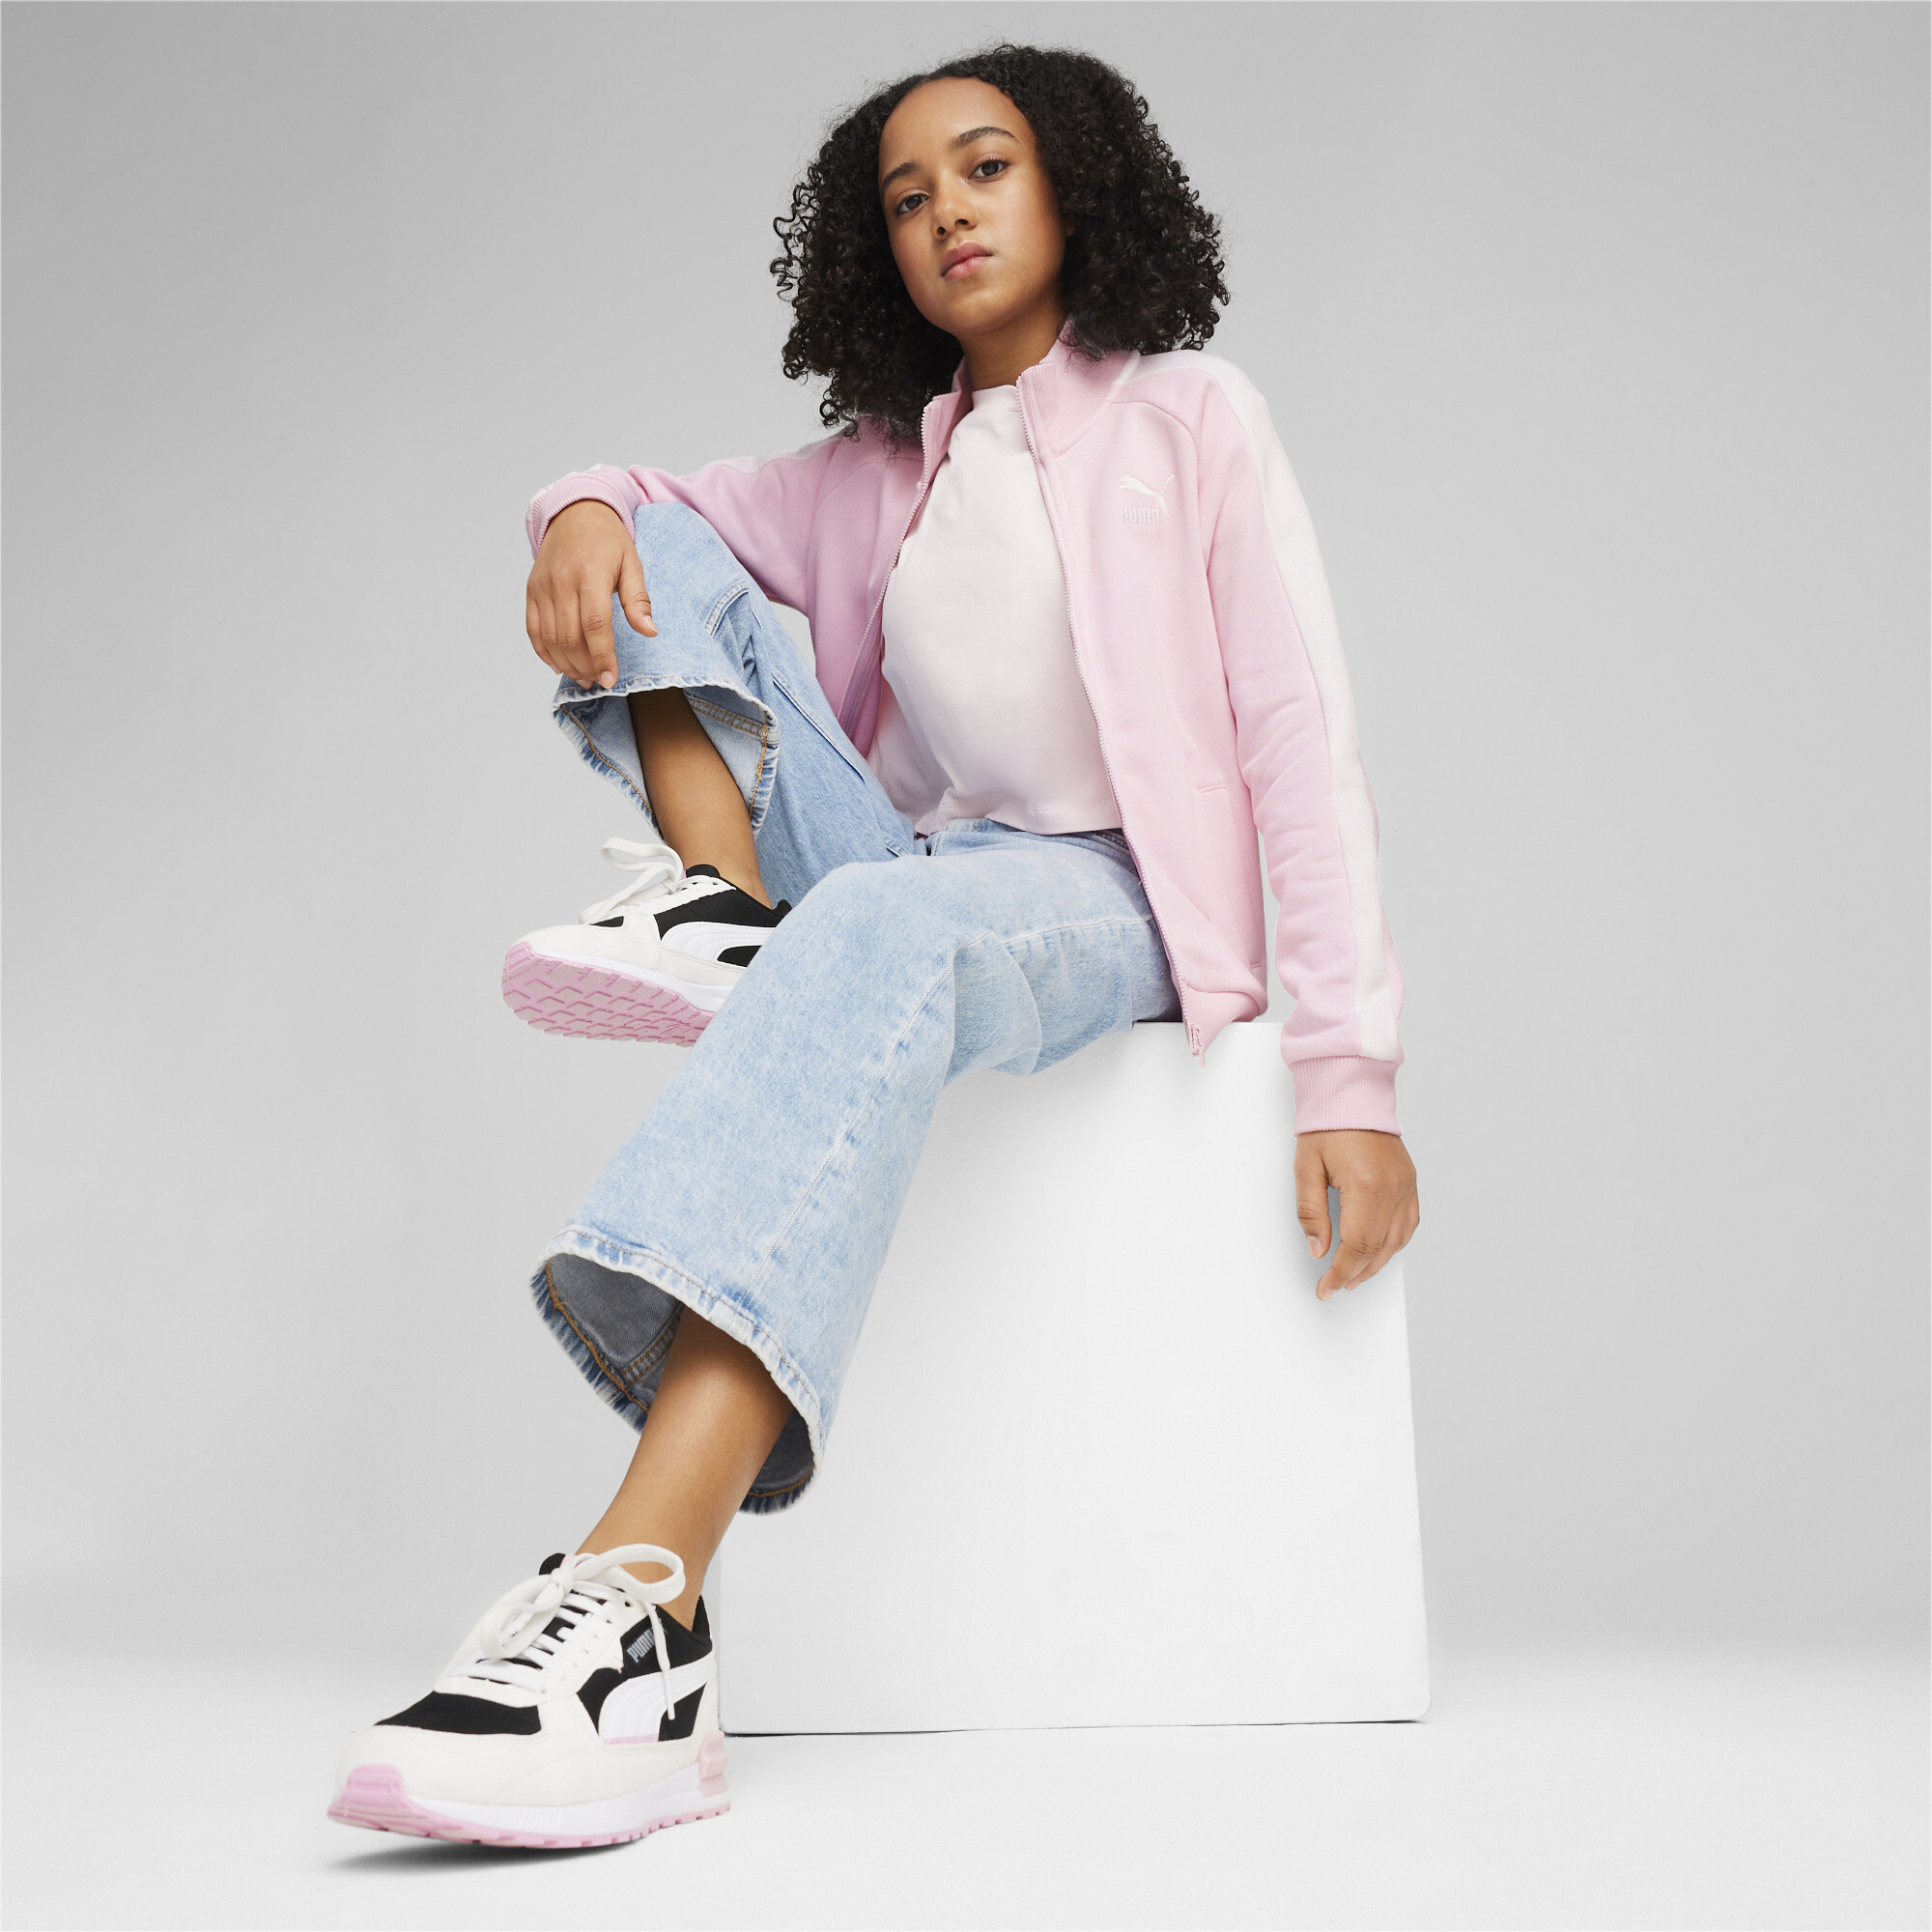 PUMA Classics T7 Track Jacket In Pink, Size 3-4 Youth